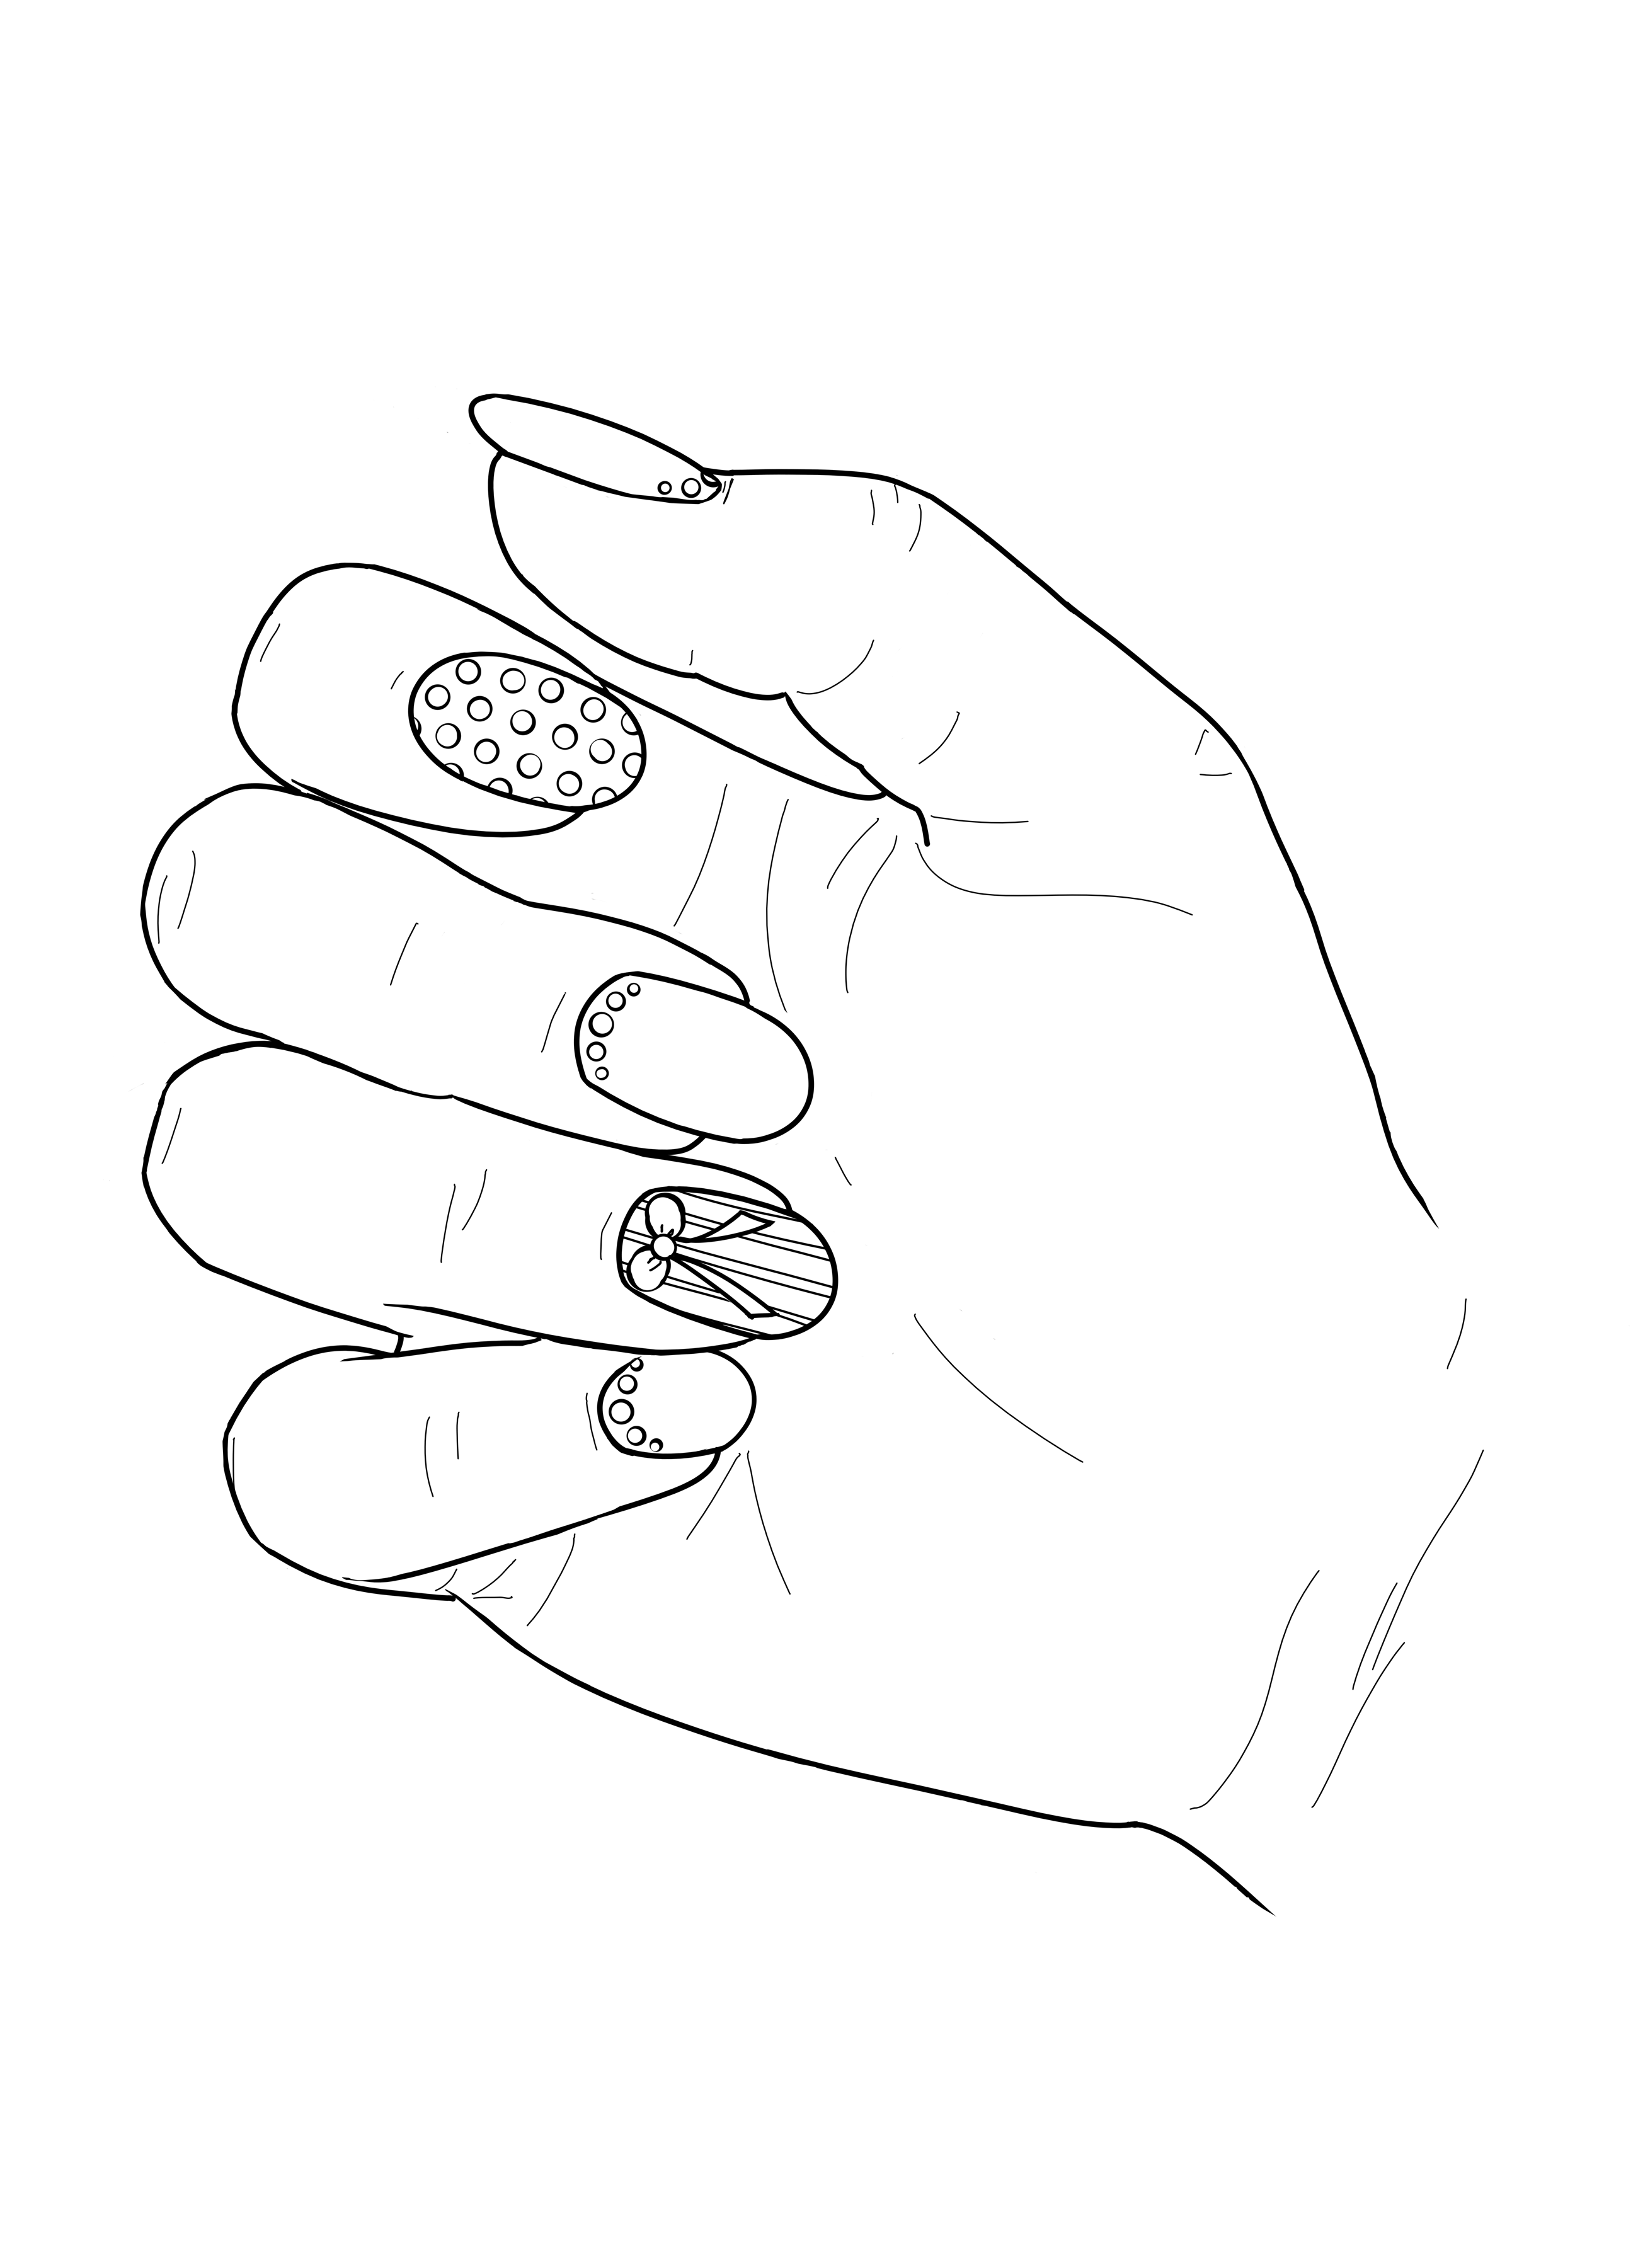 Nails Coloring Pages - Coloring Home